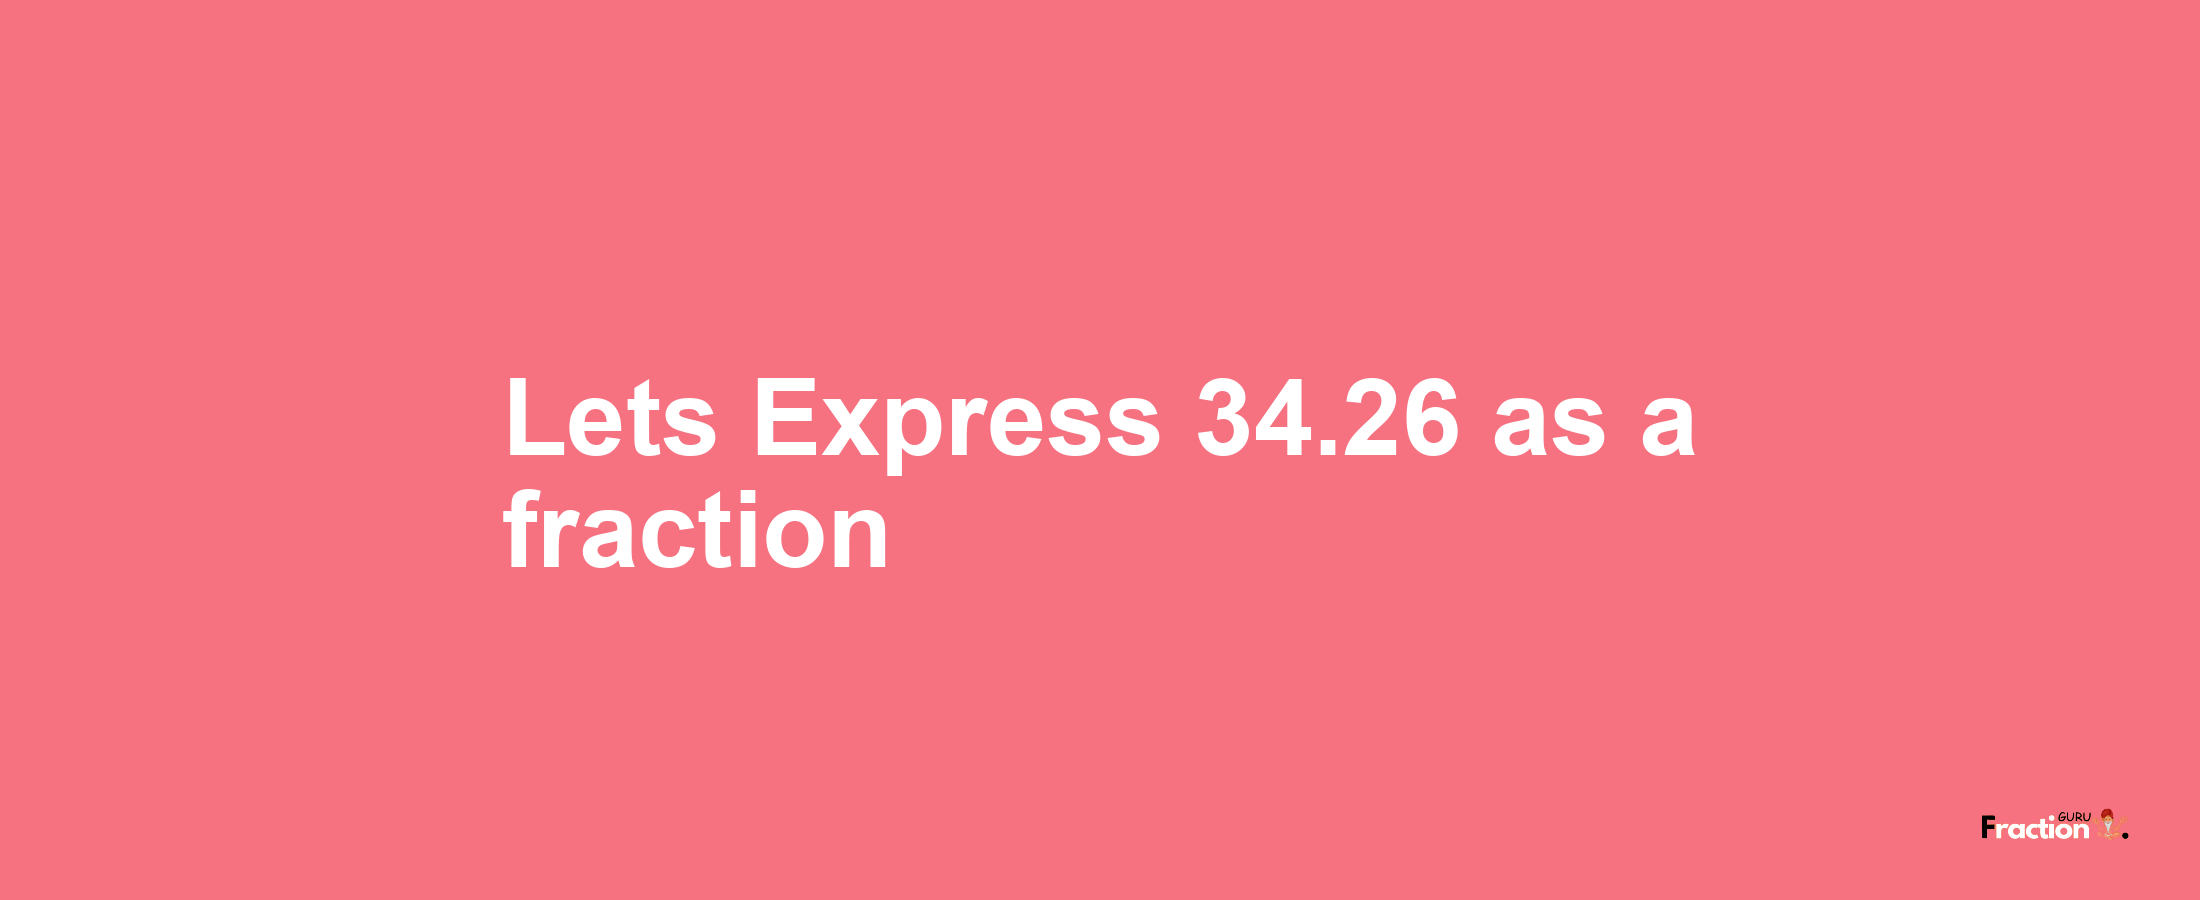 Lets Express 34.26 as afraction